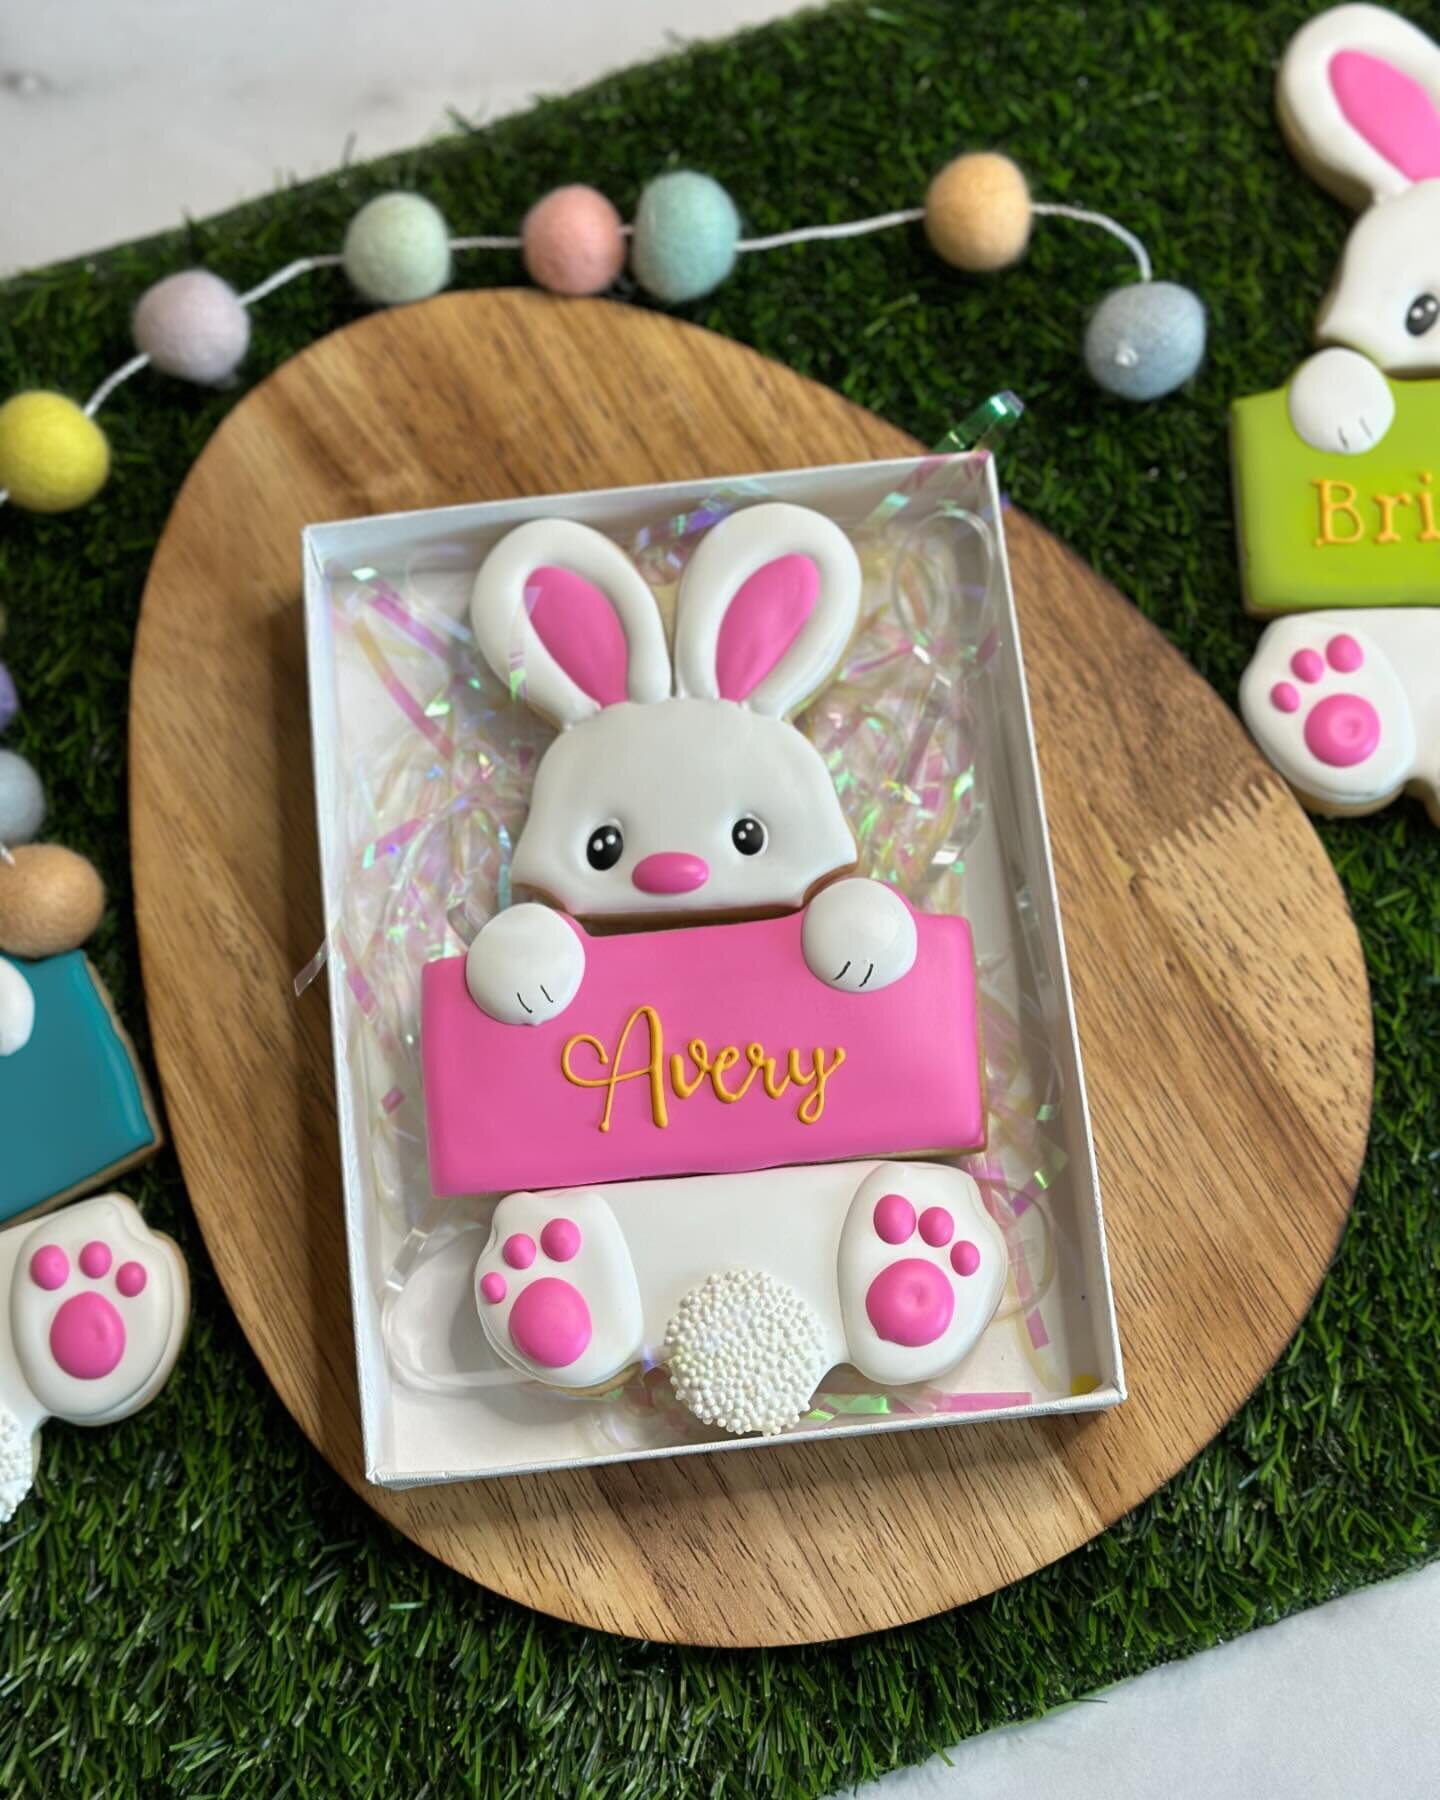 Hop into Easter with our Egg-citing Cookie Set!

PLEASE NOTE: Shipping options are currently unavailable for our delightful Easter Cookie Gift Set. However, fear not! You can still get your hands on these delectable treats by opting for pickup. All p